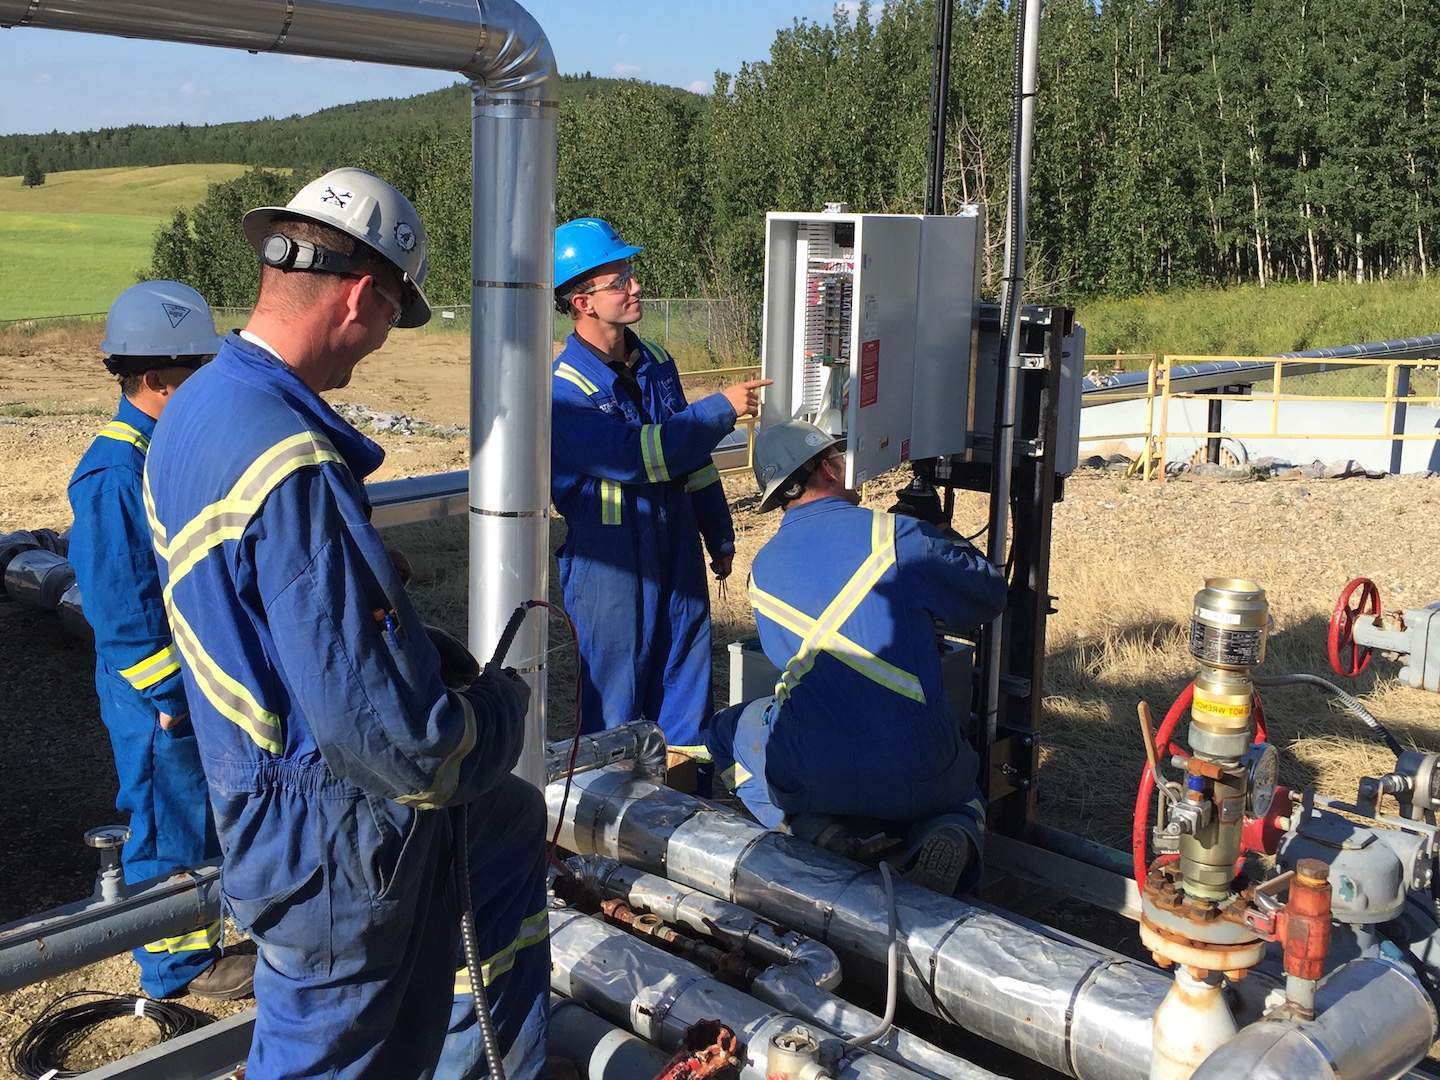 Four technicians working on installation of the CROSSFIRE ultra-low power solar chemical injection pump in the field